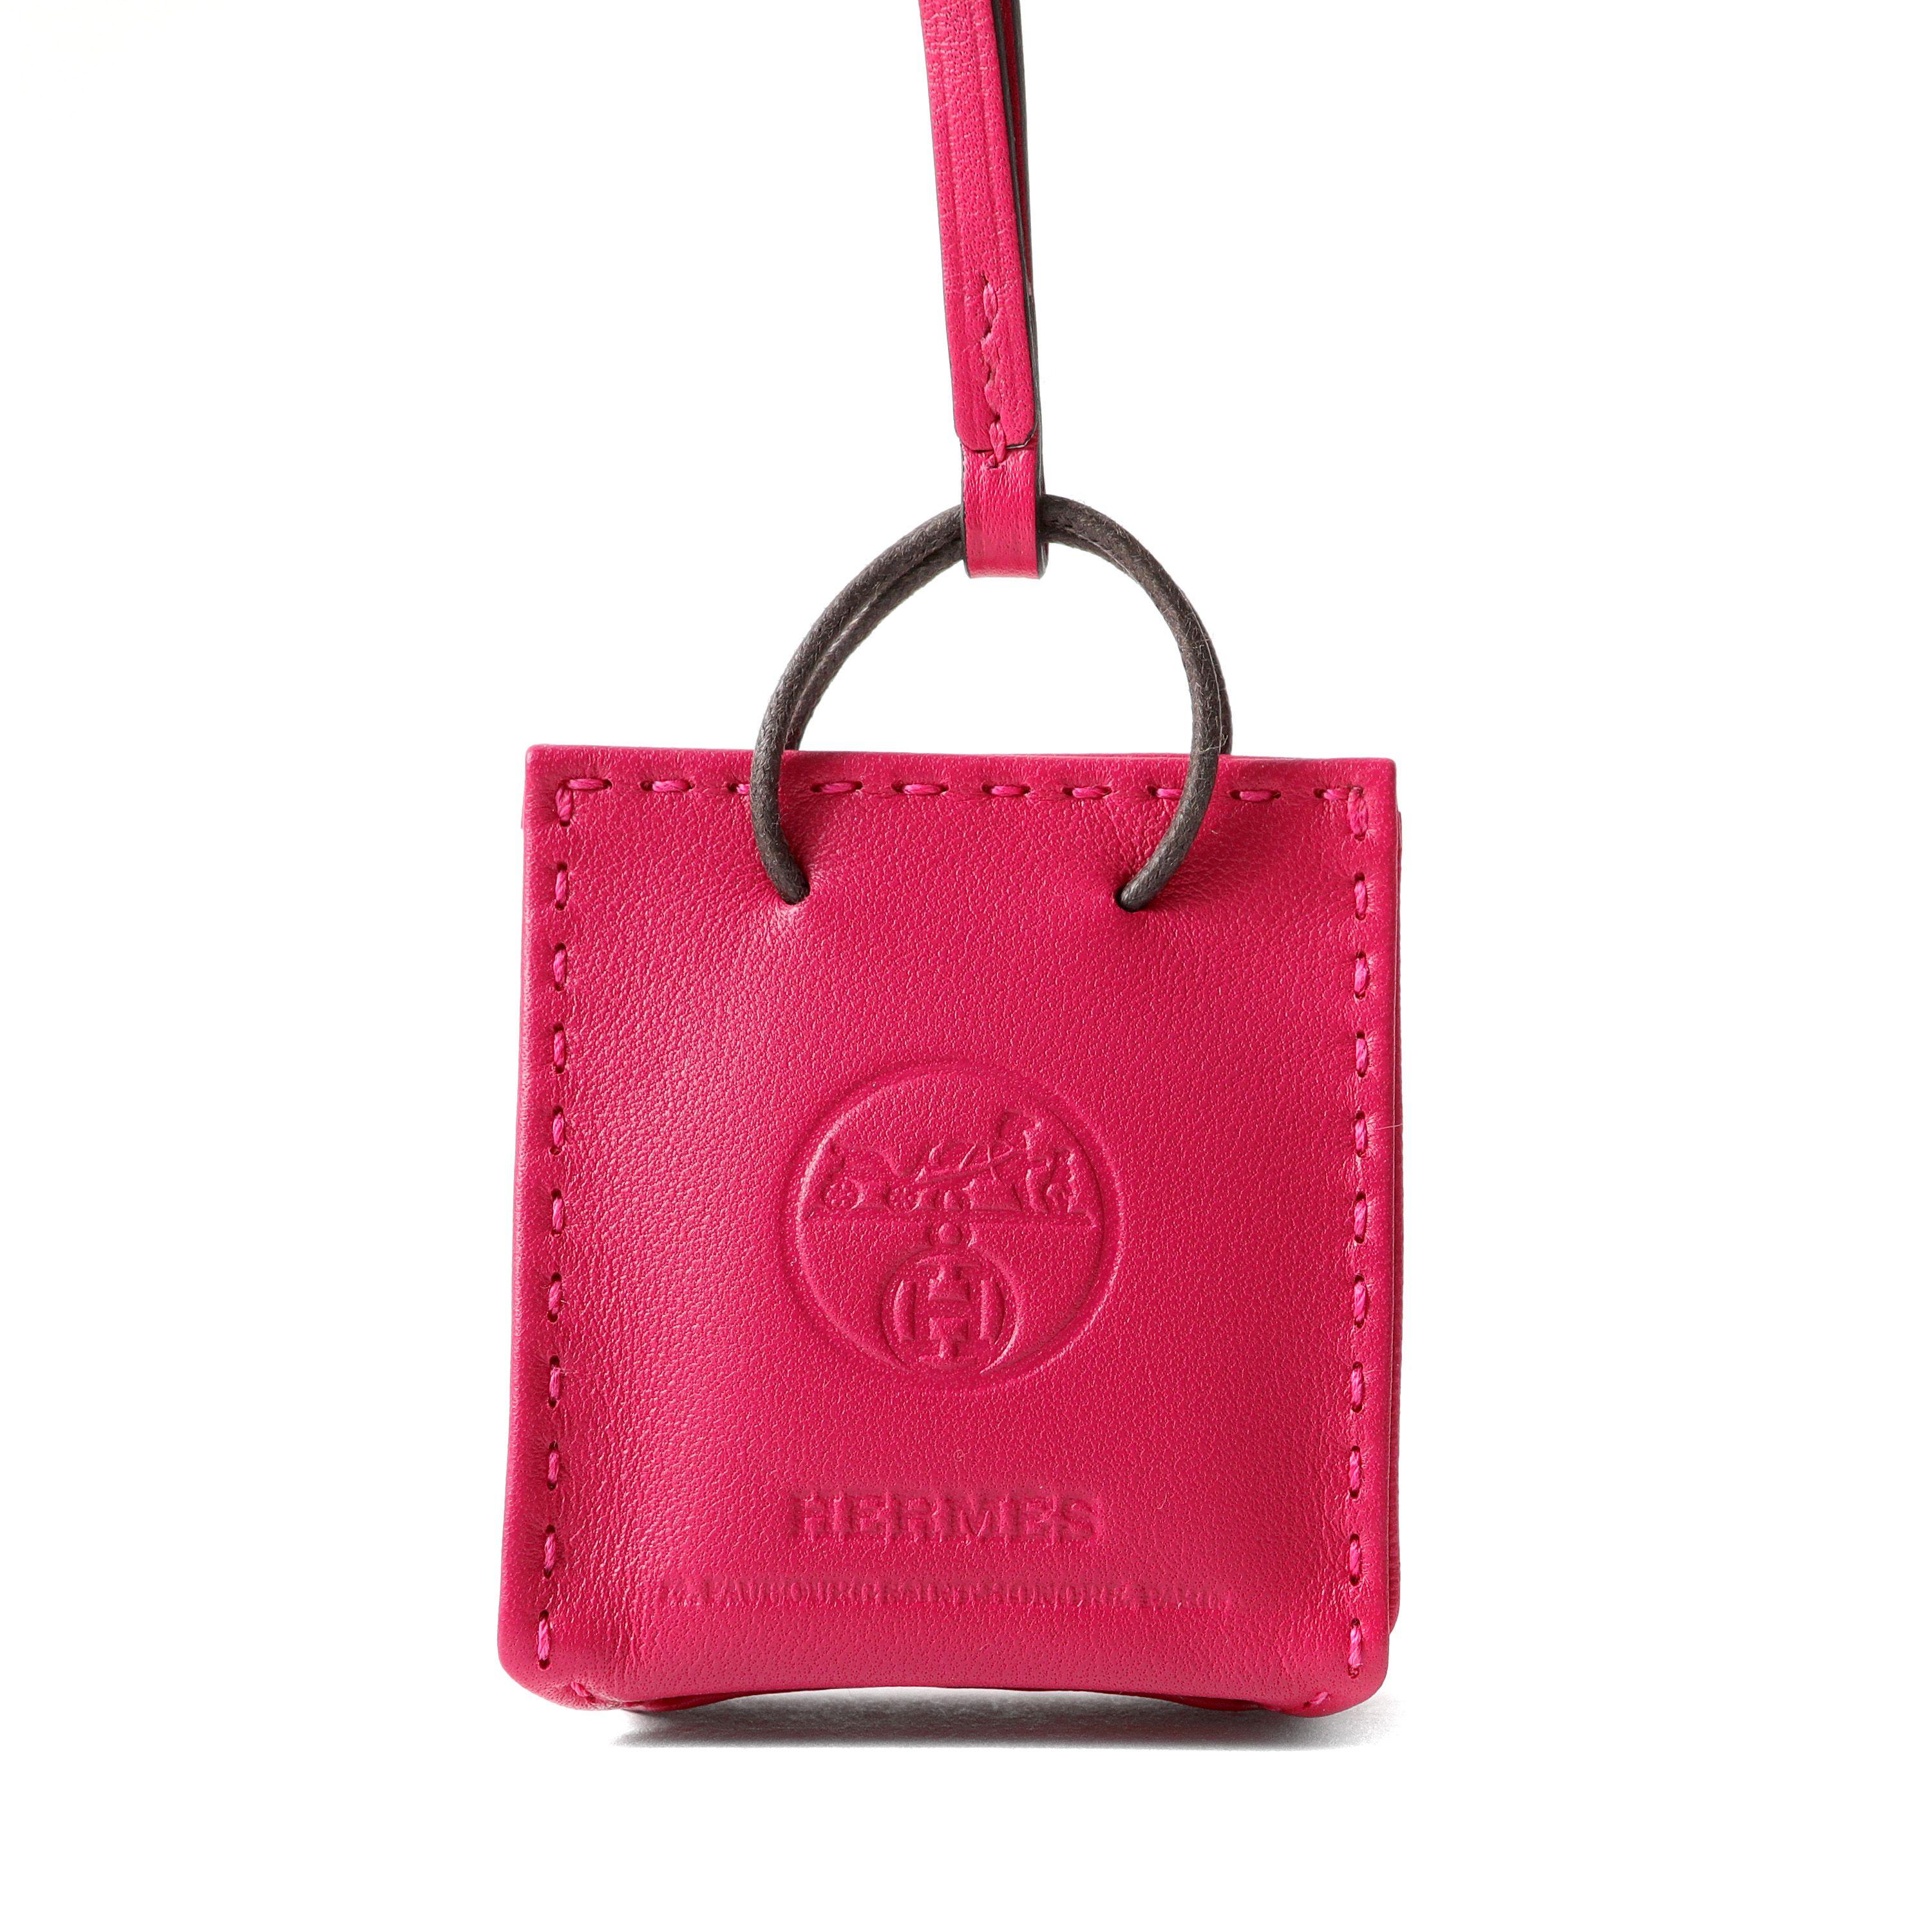 Hermès Pink Shopping Bag Charm In New Condition For Sale In Palm Beach, FL